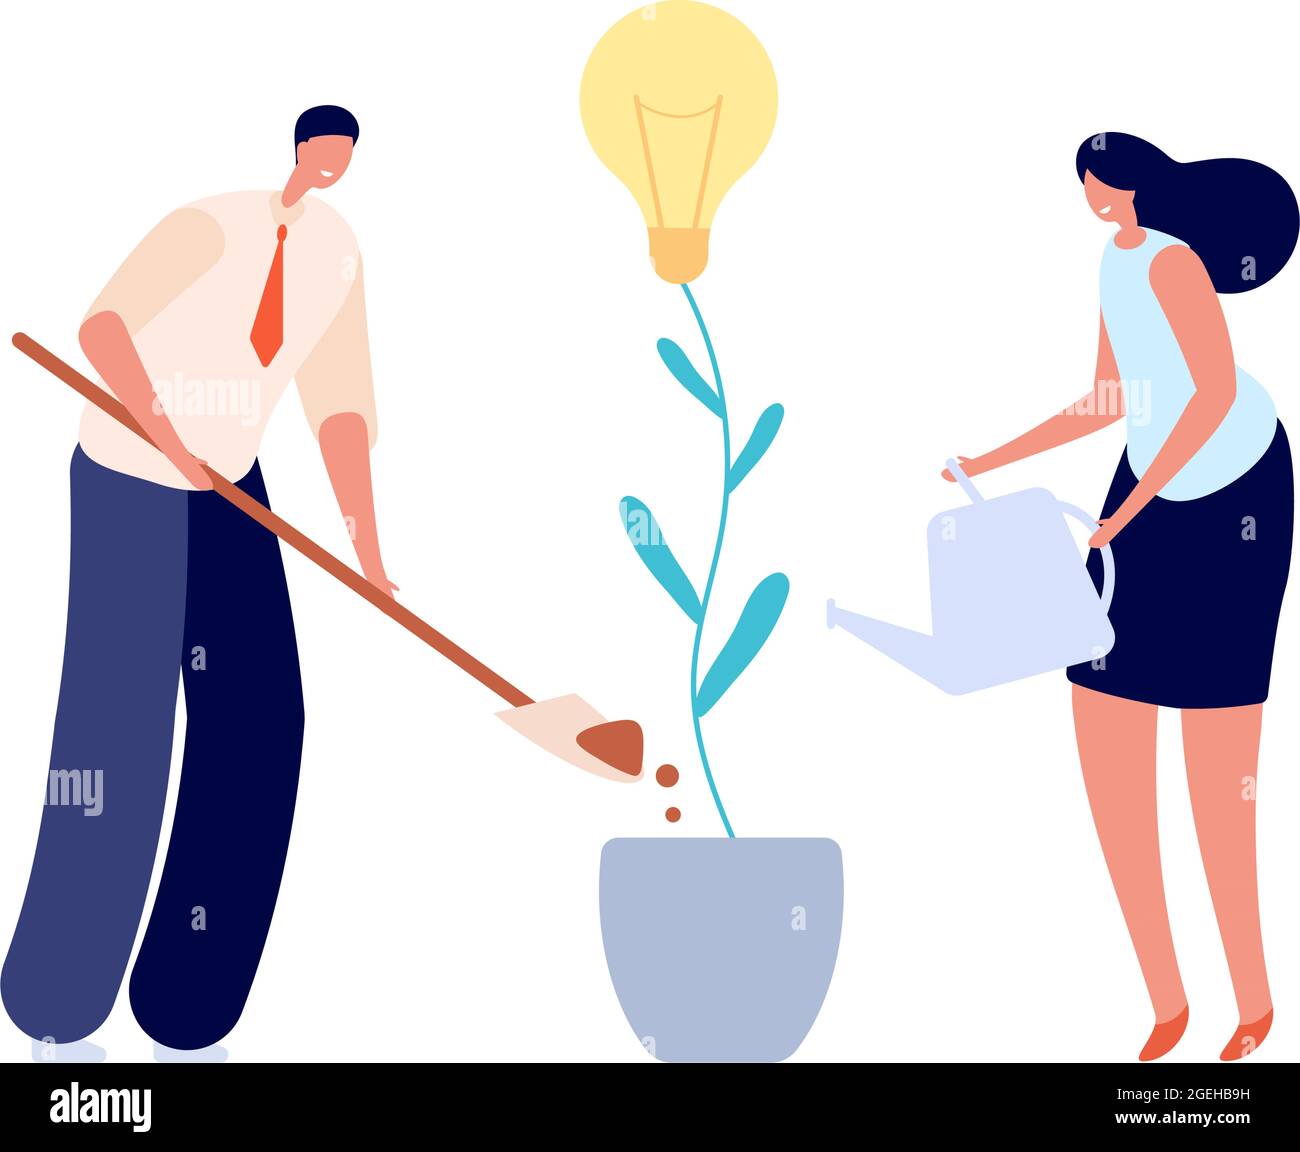 People growth idea. Growing innovation, teamwork or investment in future metaphor. People planting business support utter vector concept Stock Vector